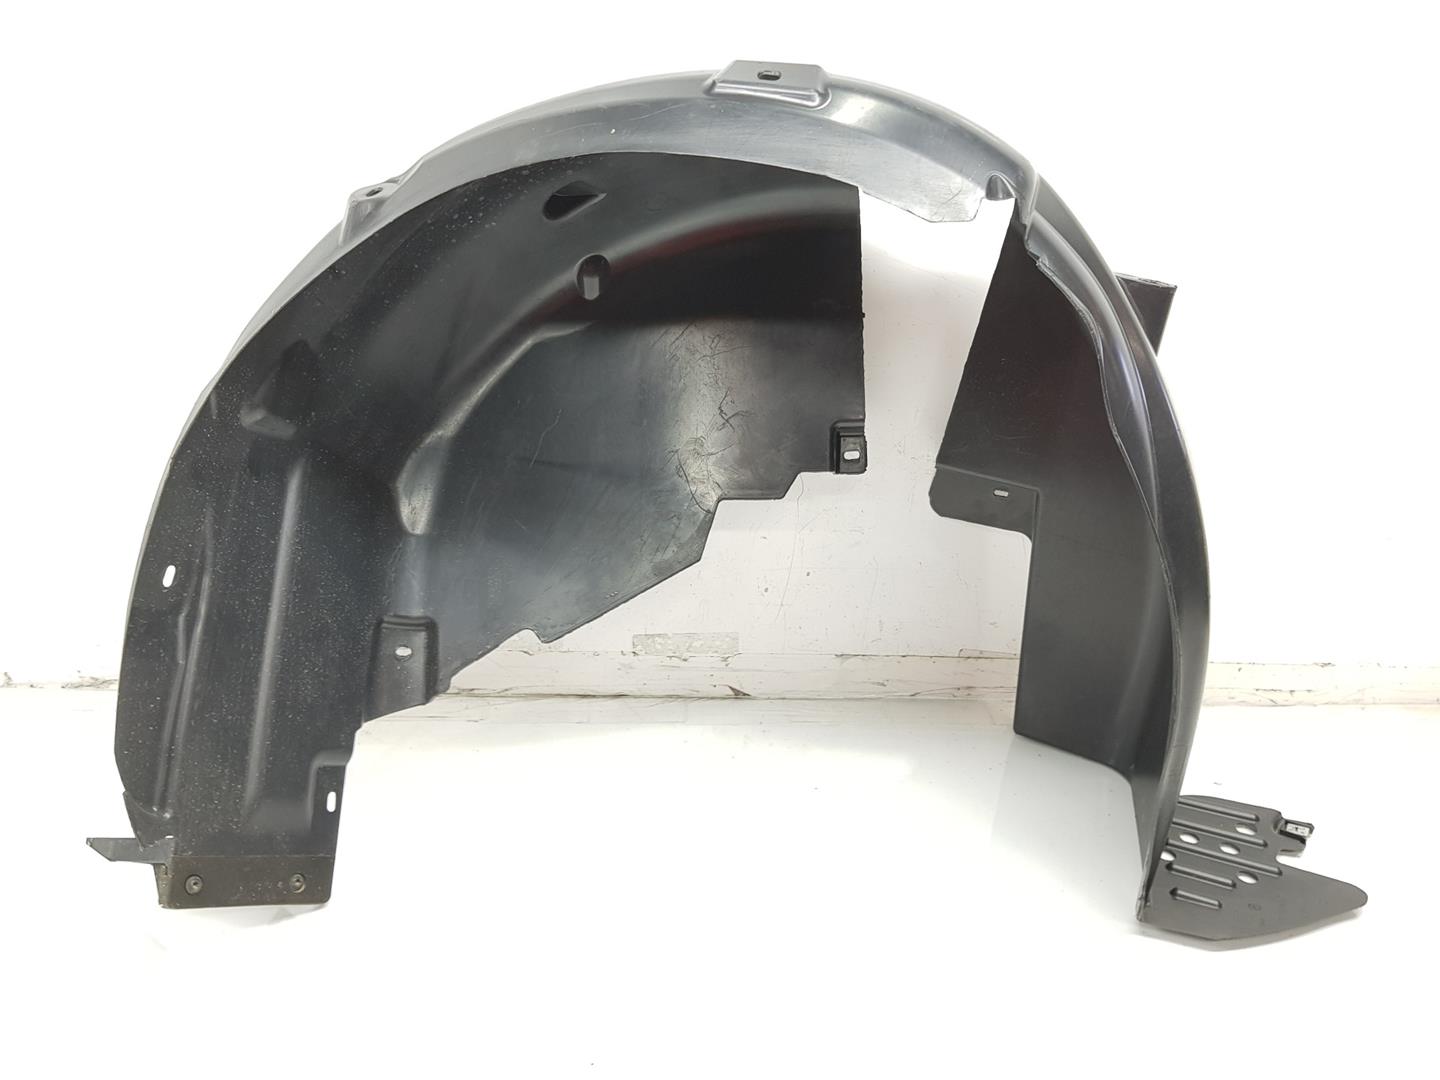 SEAT Alhambra 2 generation (2010-2021) Other Body Parts 6F0810969M, 6F0810969M 25101044